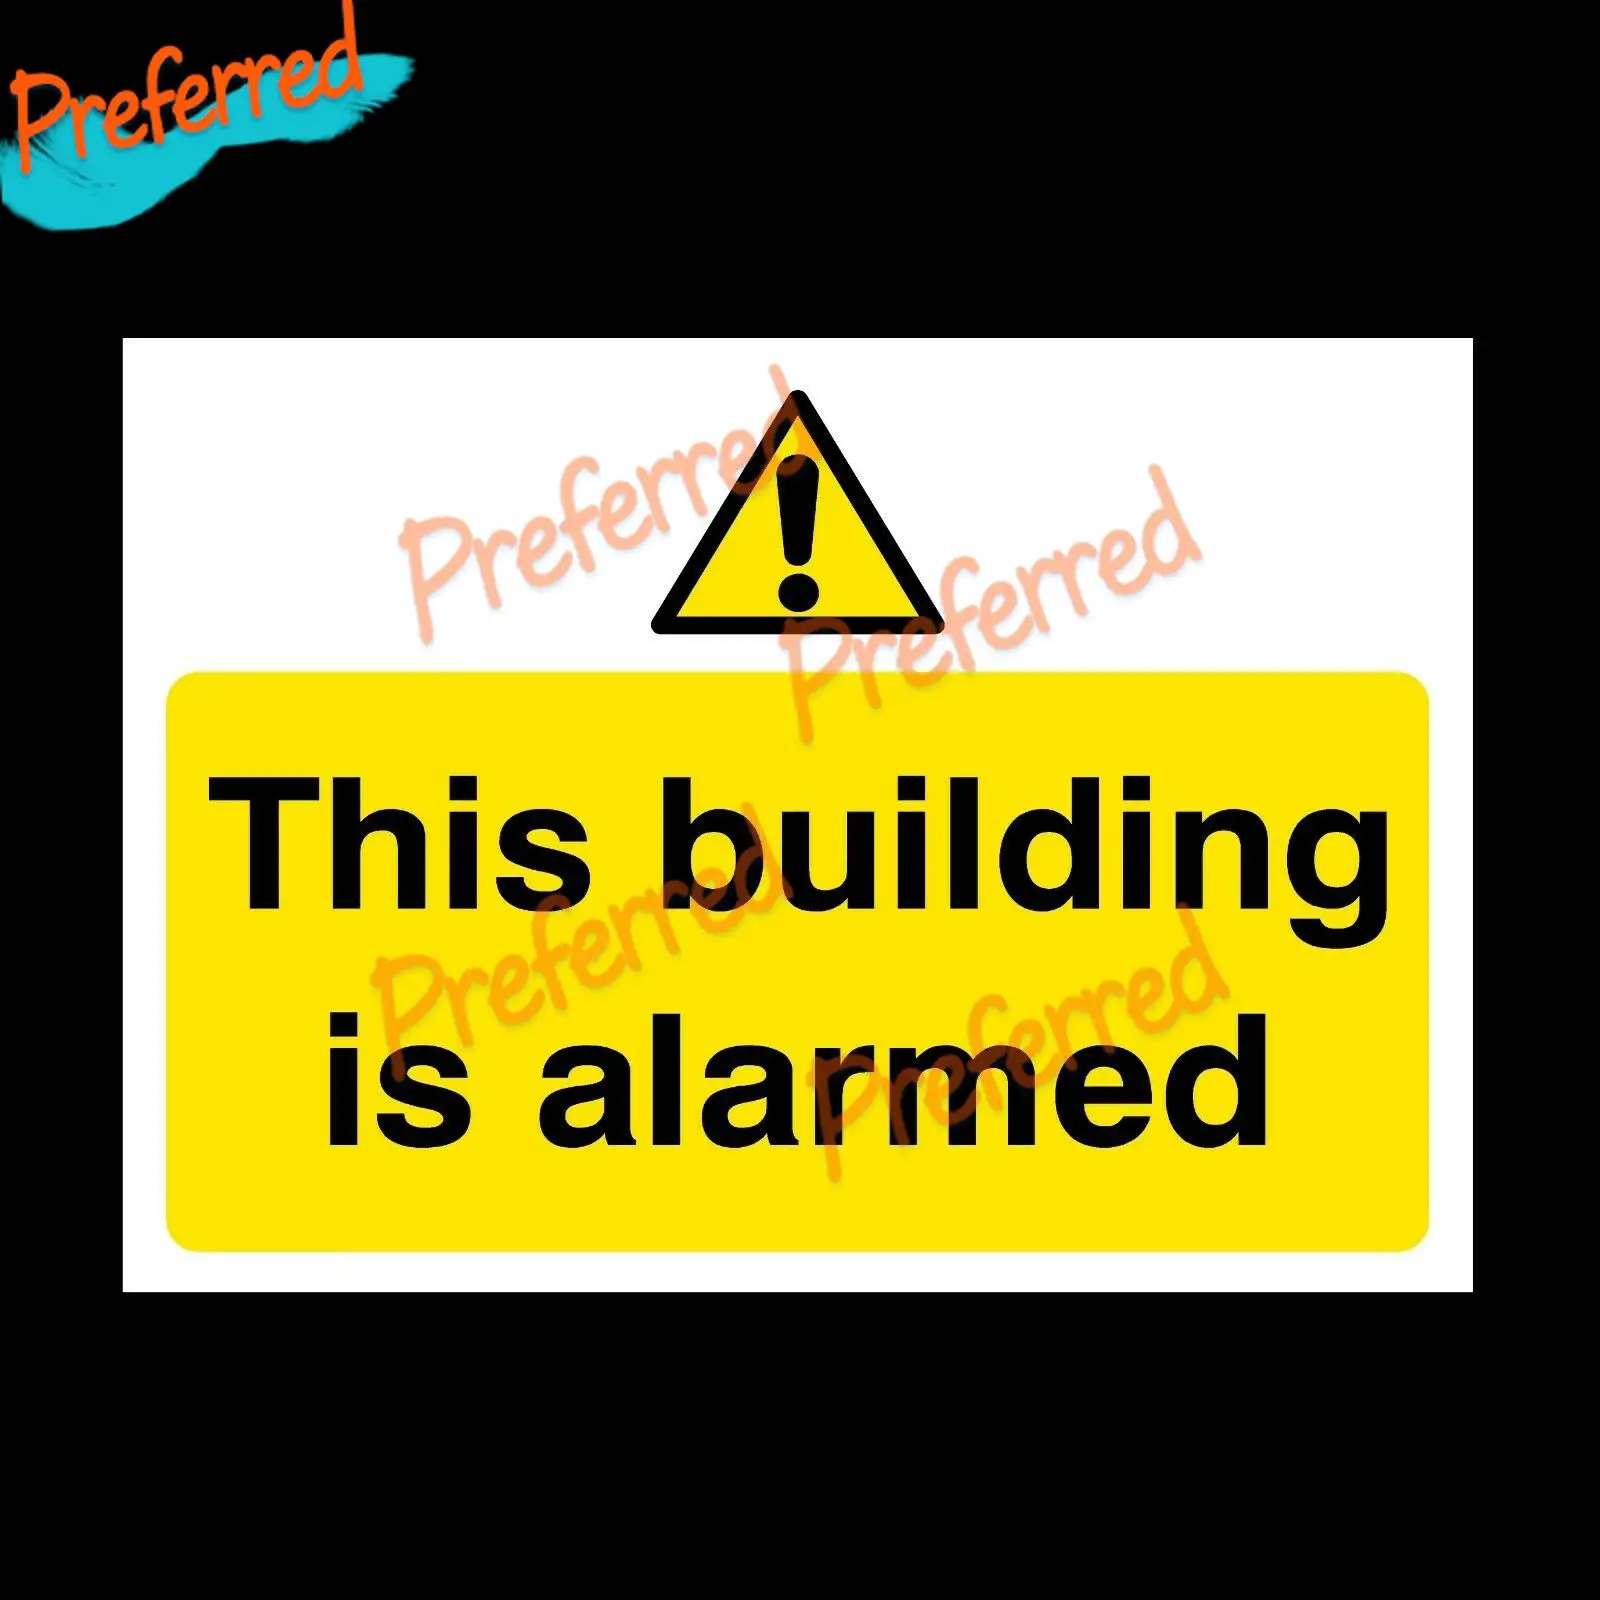 

This Door Is Alarmed Rigid Plastic Sign OR Sticker - All Sizes - CCTV - Warning Signs Collection - Die-Cut Waterproof PVC